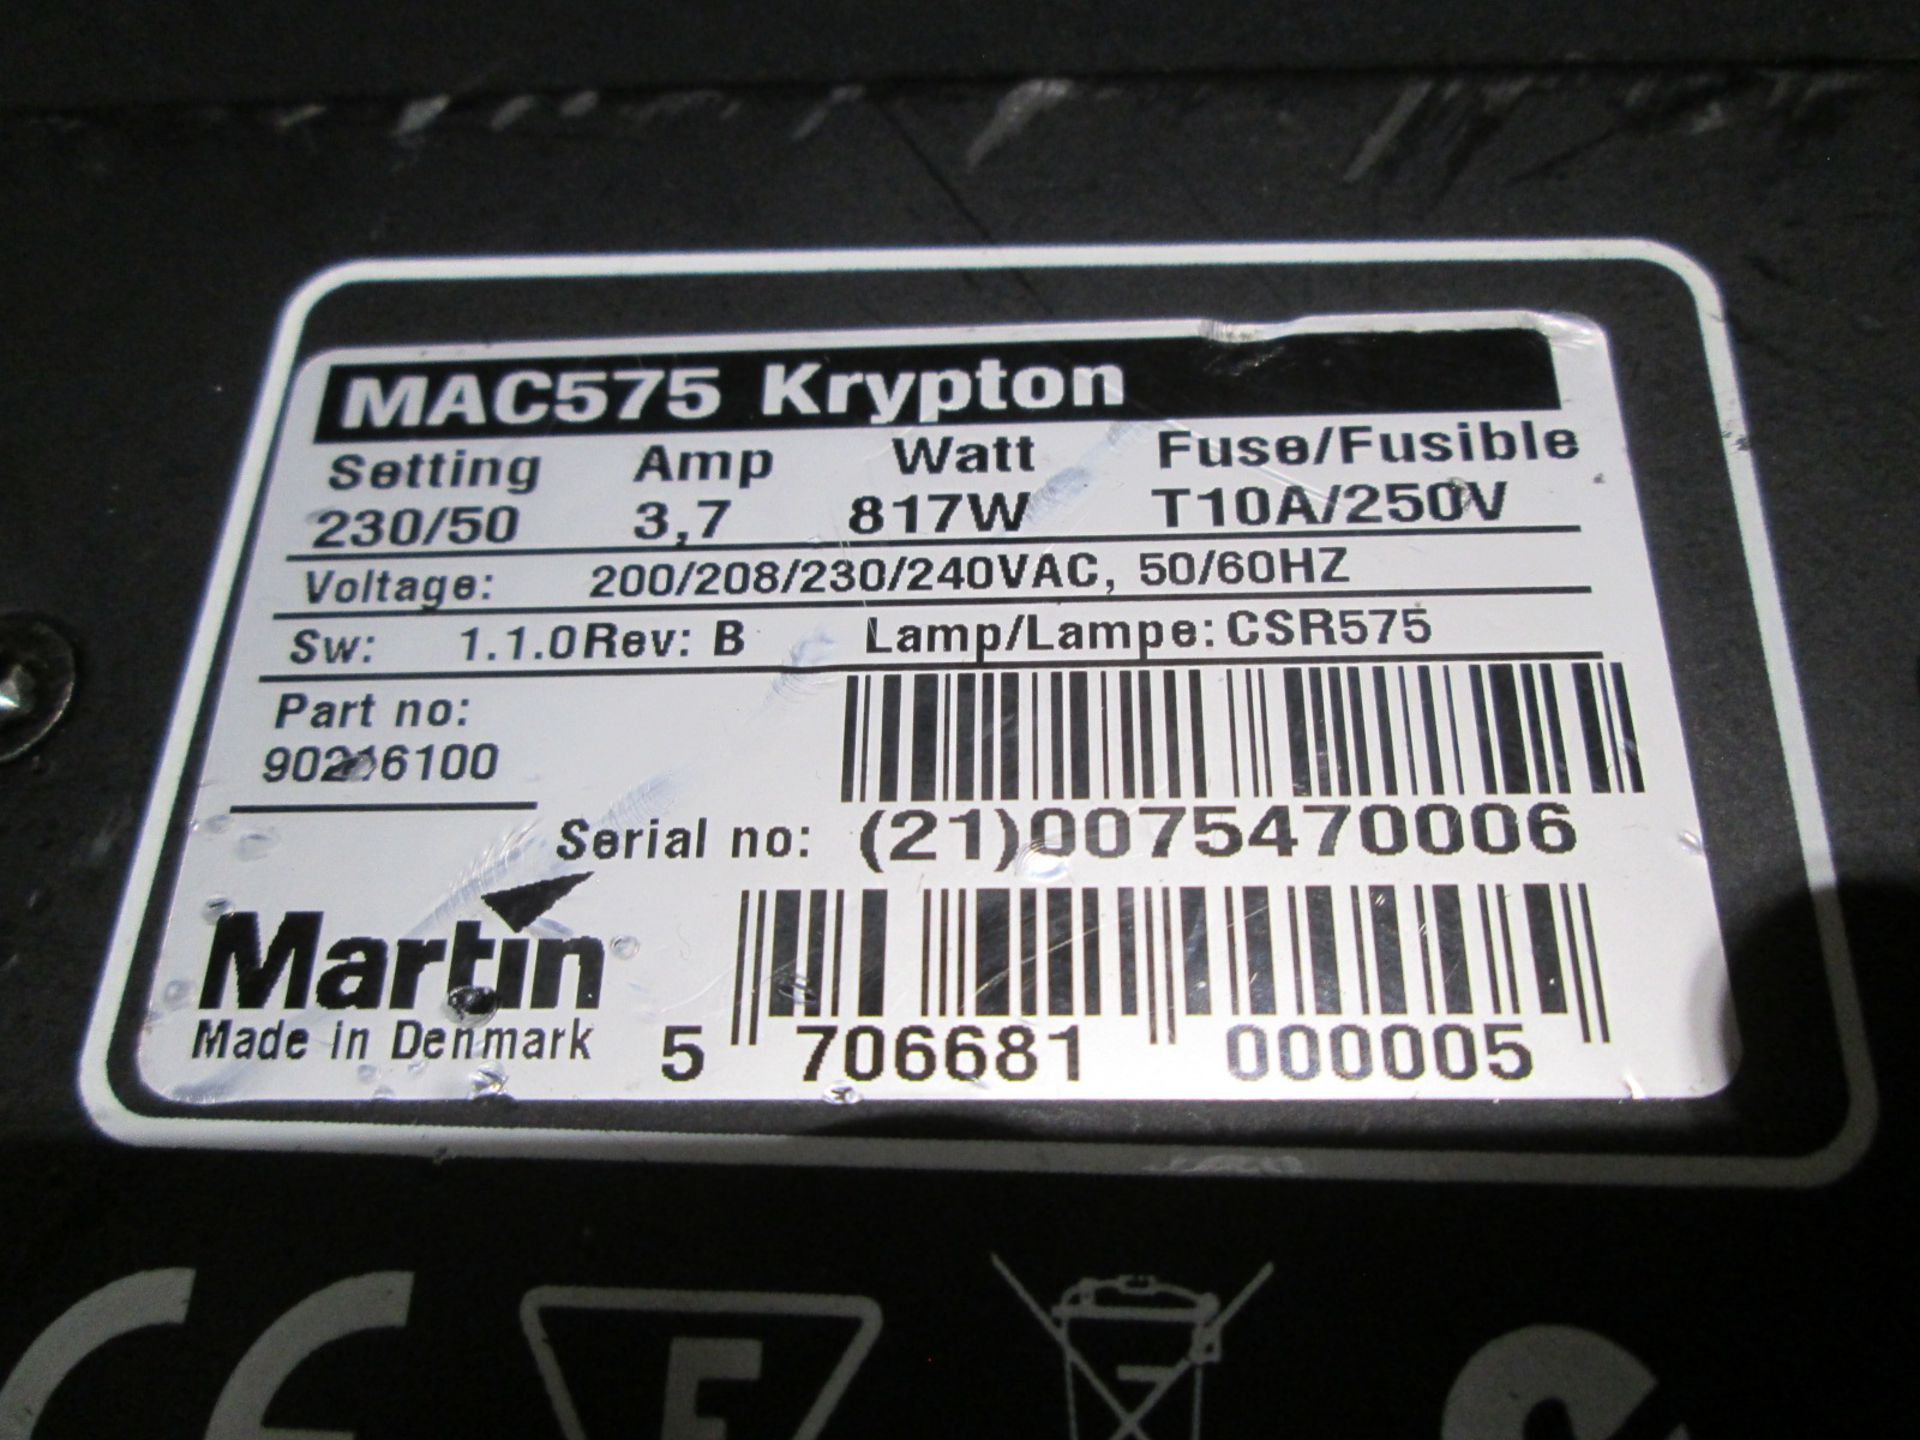 Martin MAC575 Kryton Moving Spot Light (Qty 2) In flight case with hanging brackets. S/N - Image 8 of 10